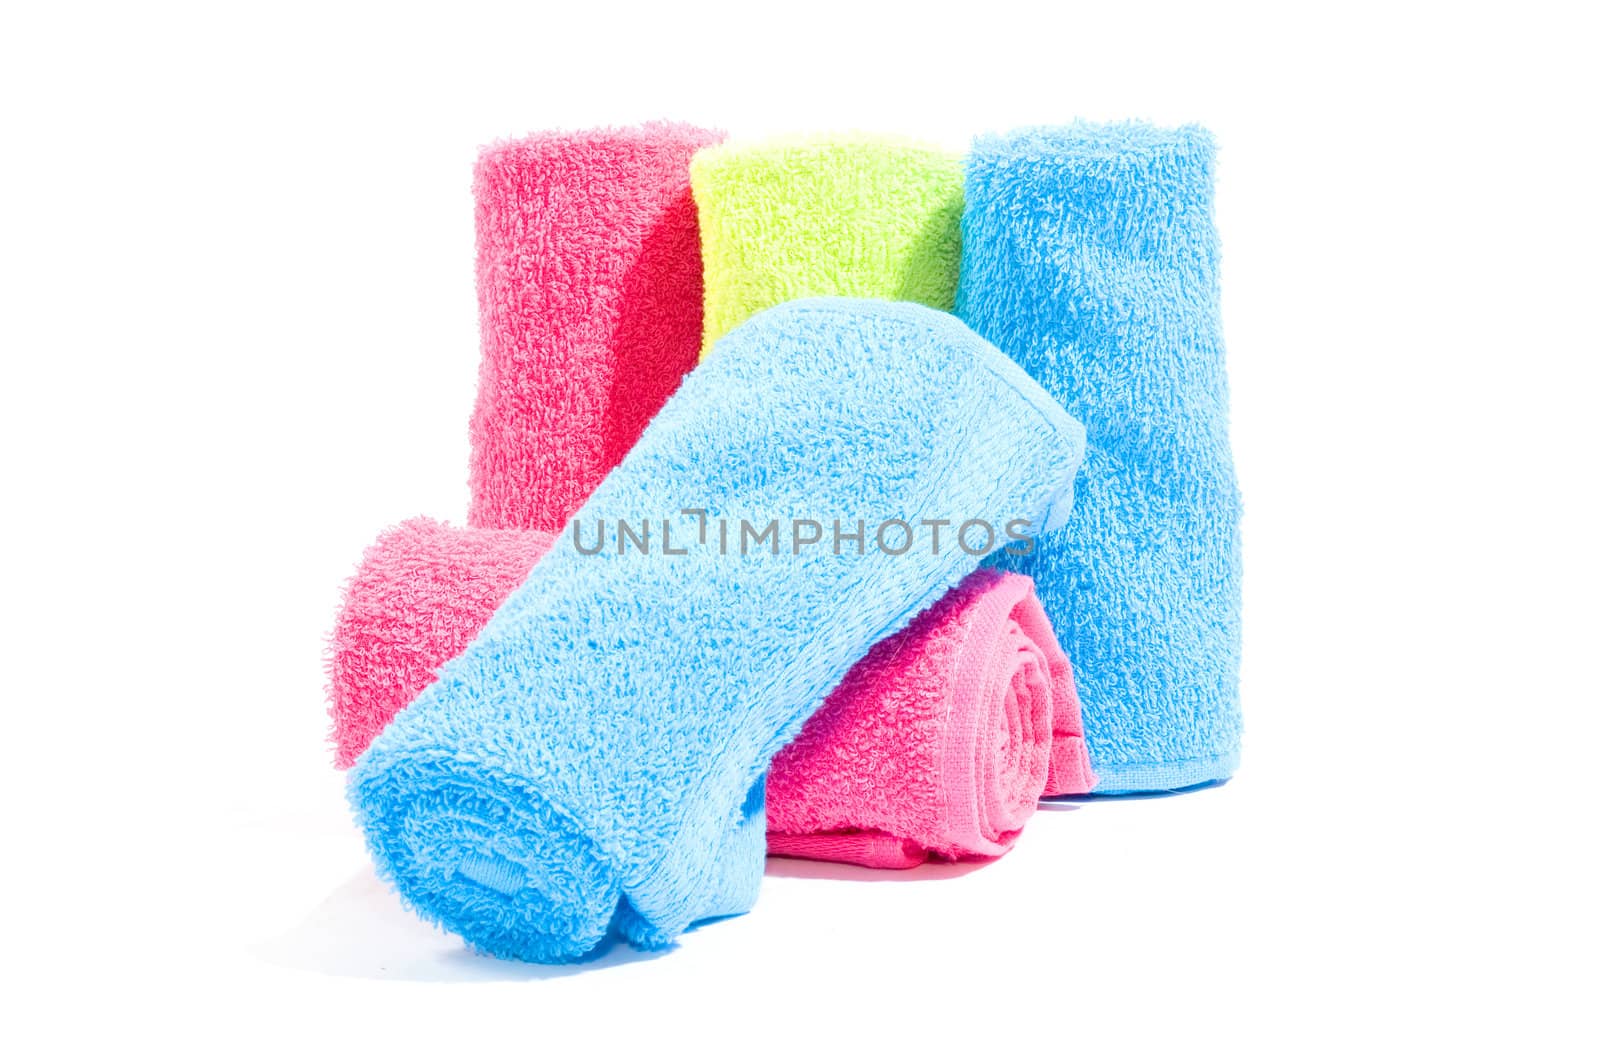 Colorful towel rolls on a white background  by ladyminnie